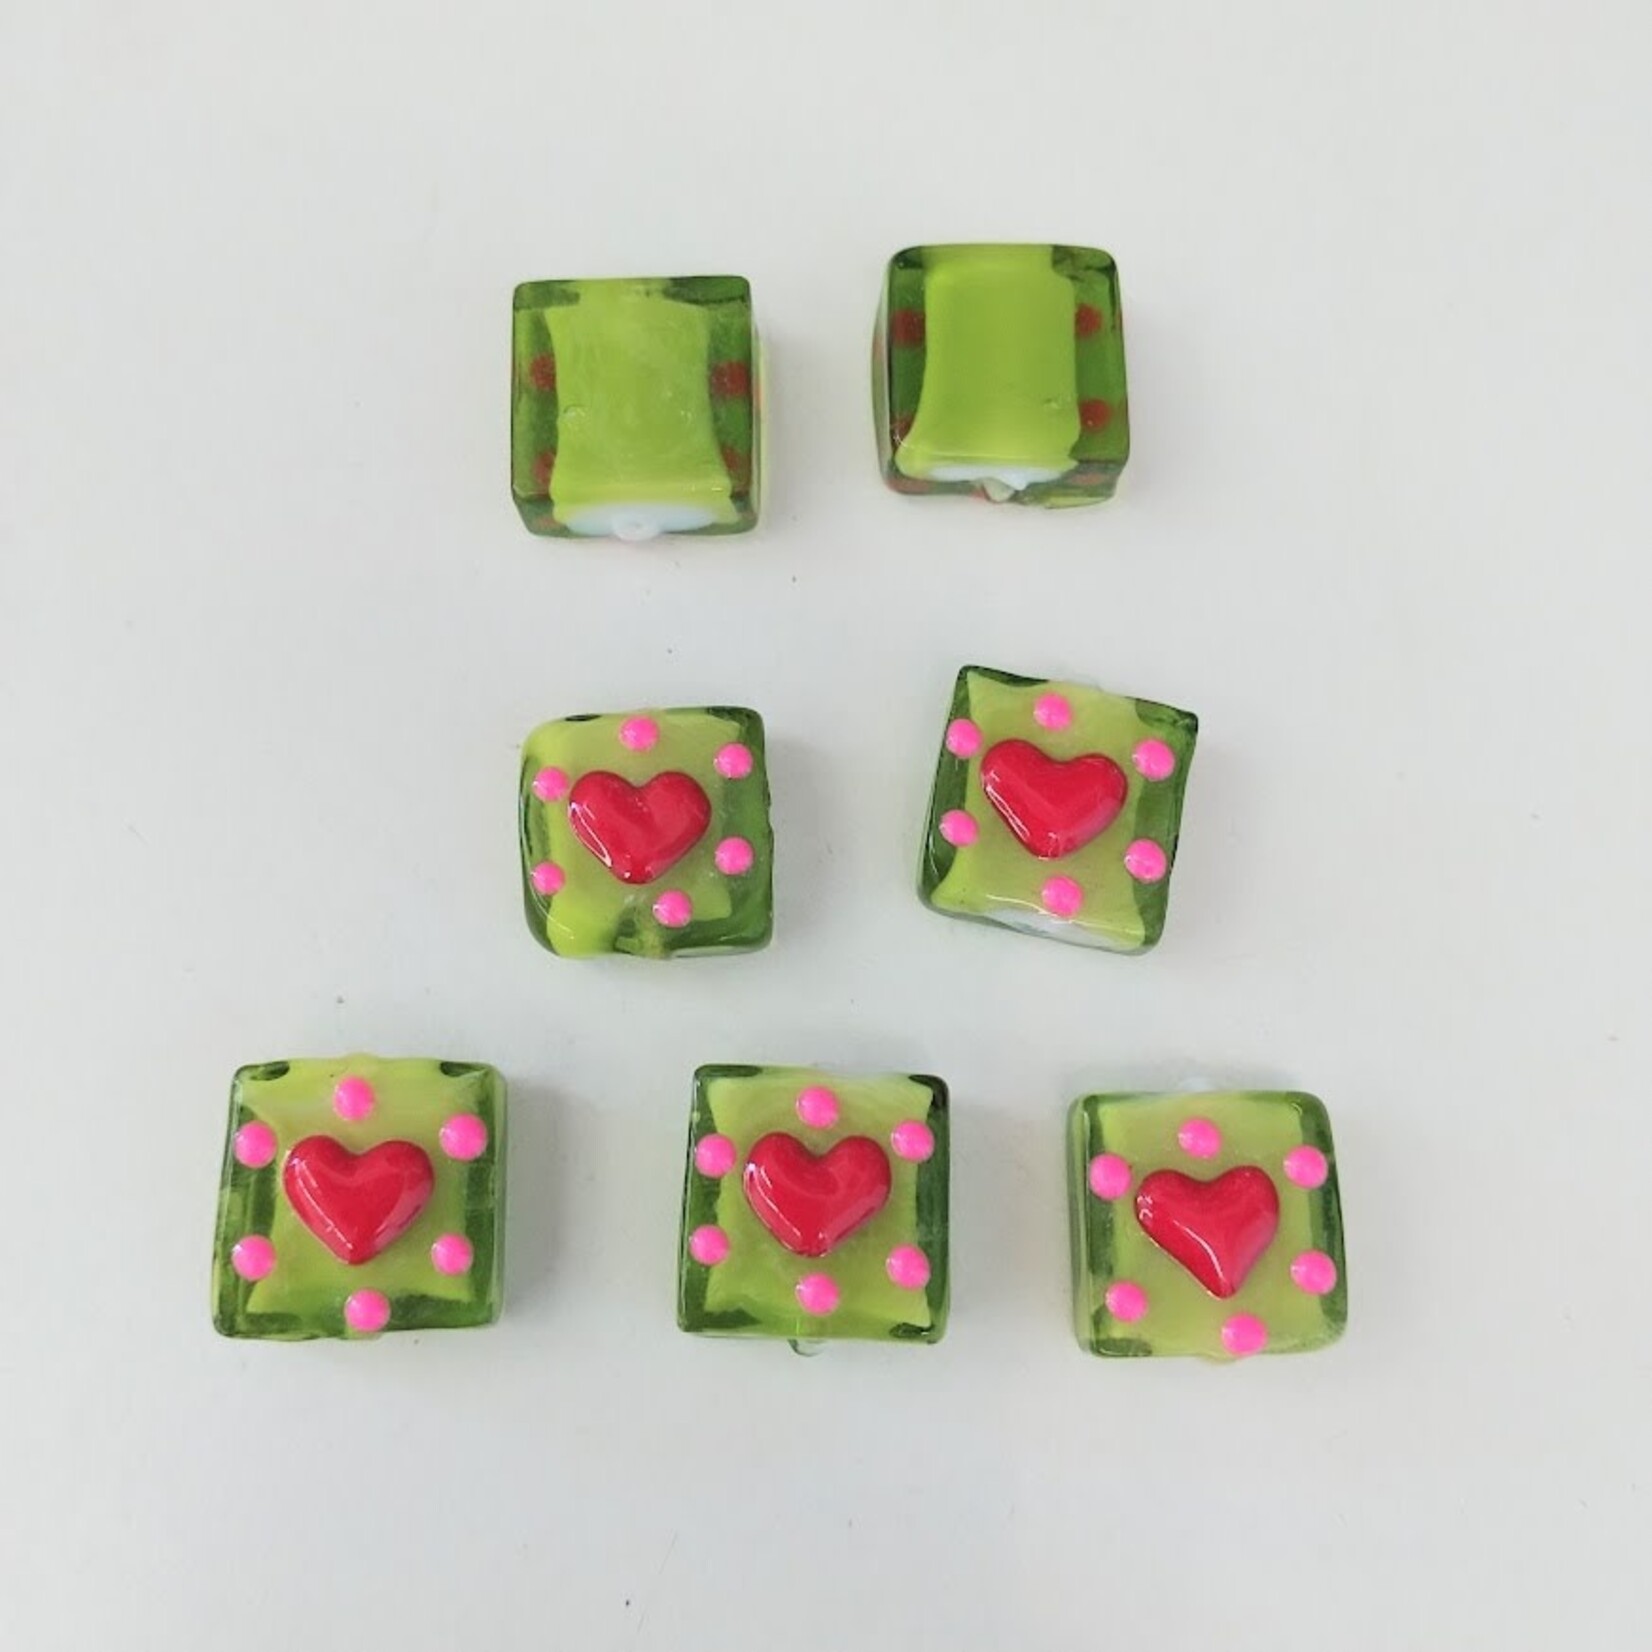 Lampwork Glass 15mm Radiating Heart on Green Square Bead